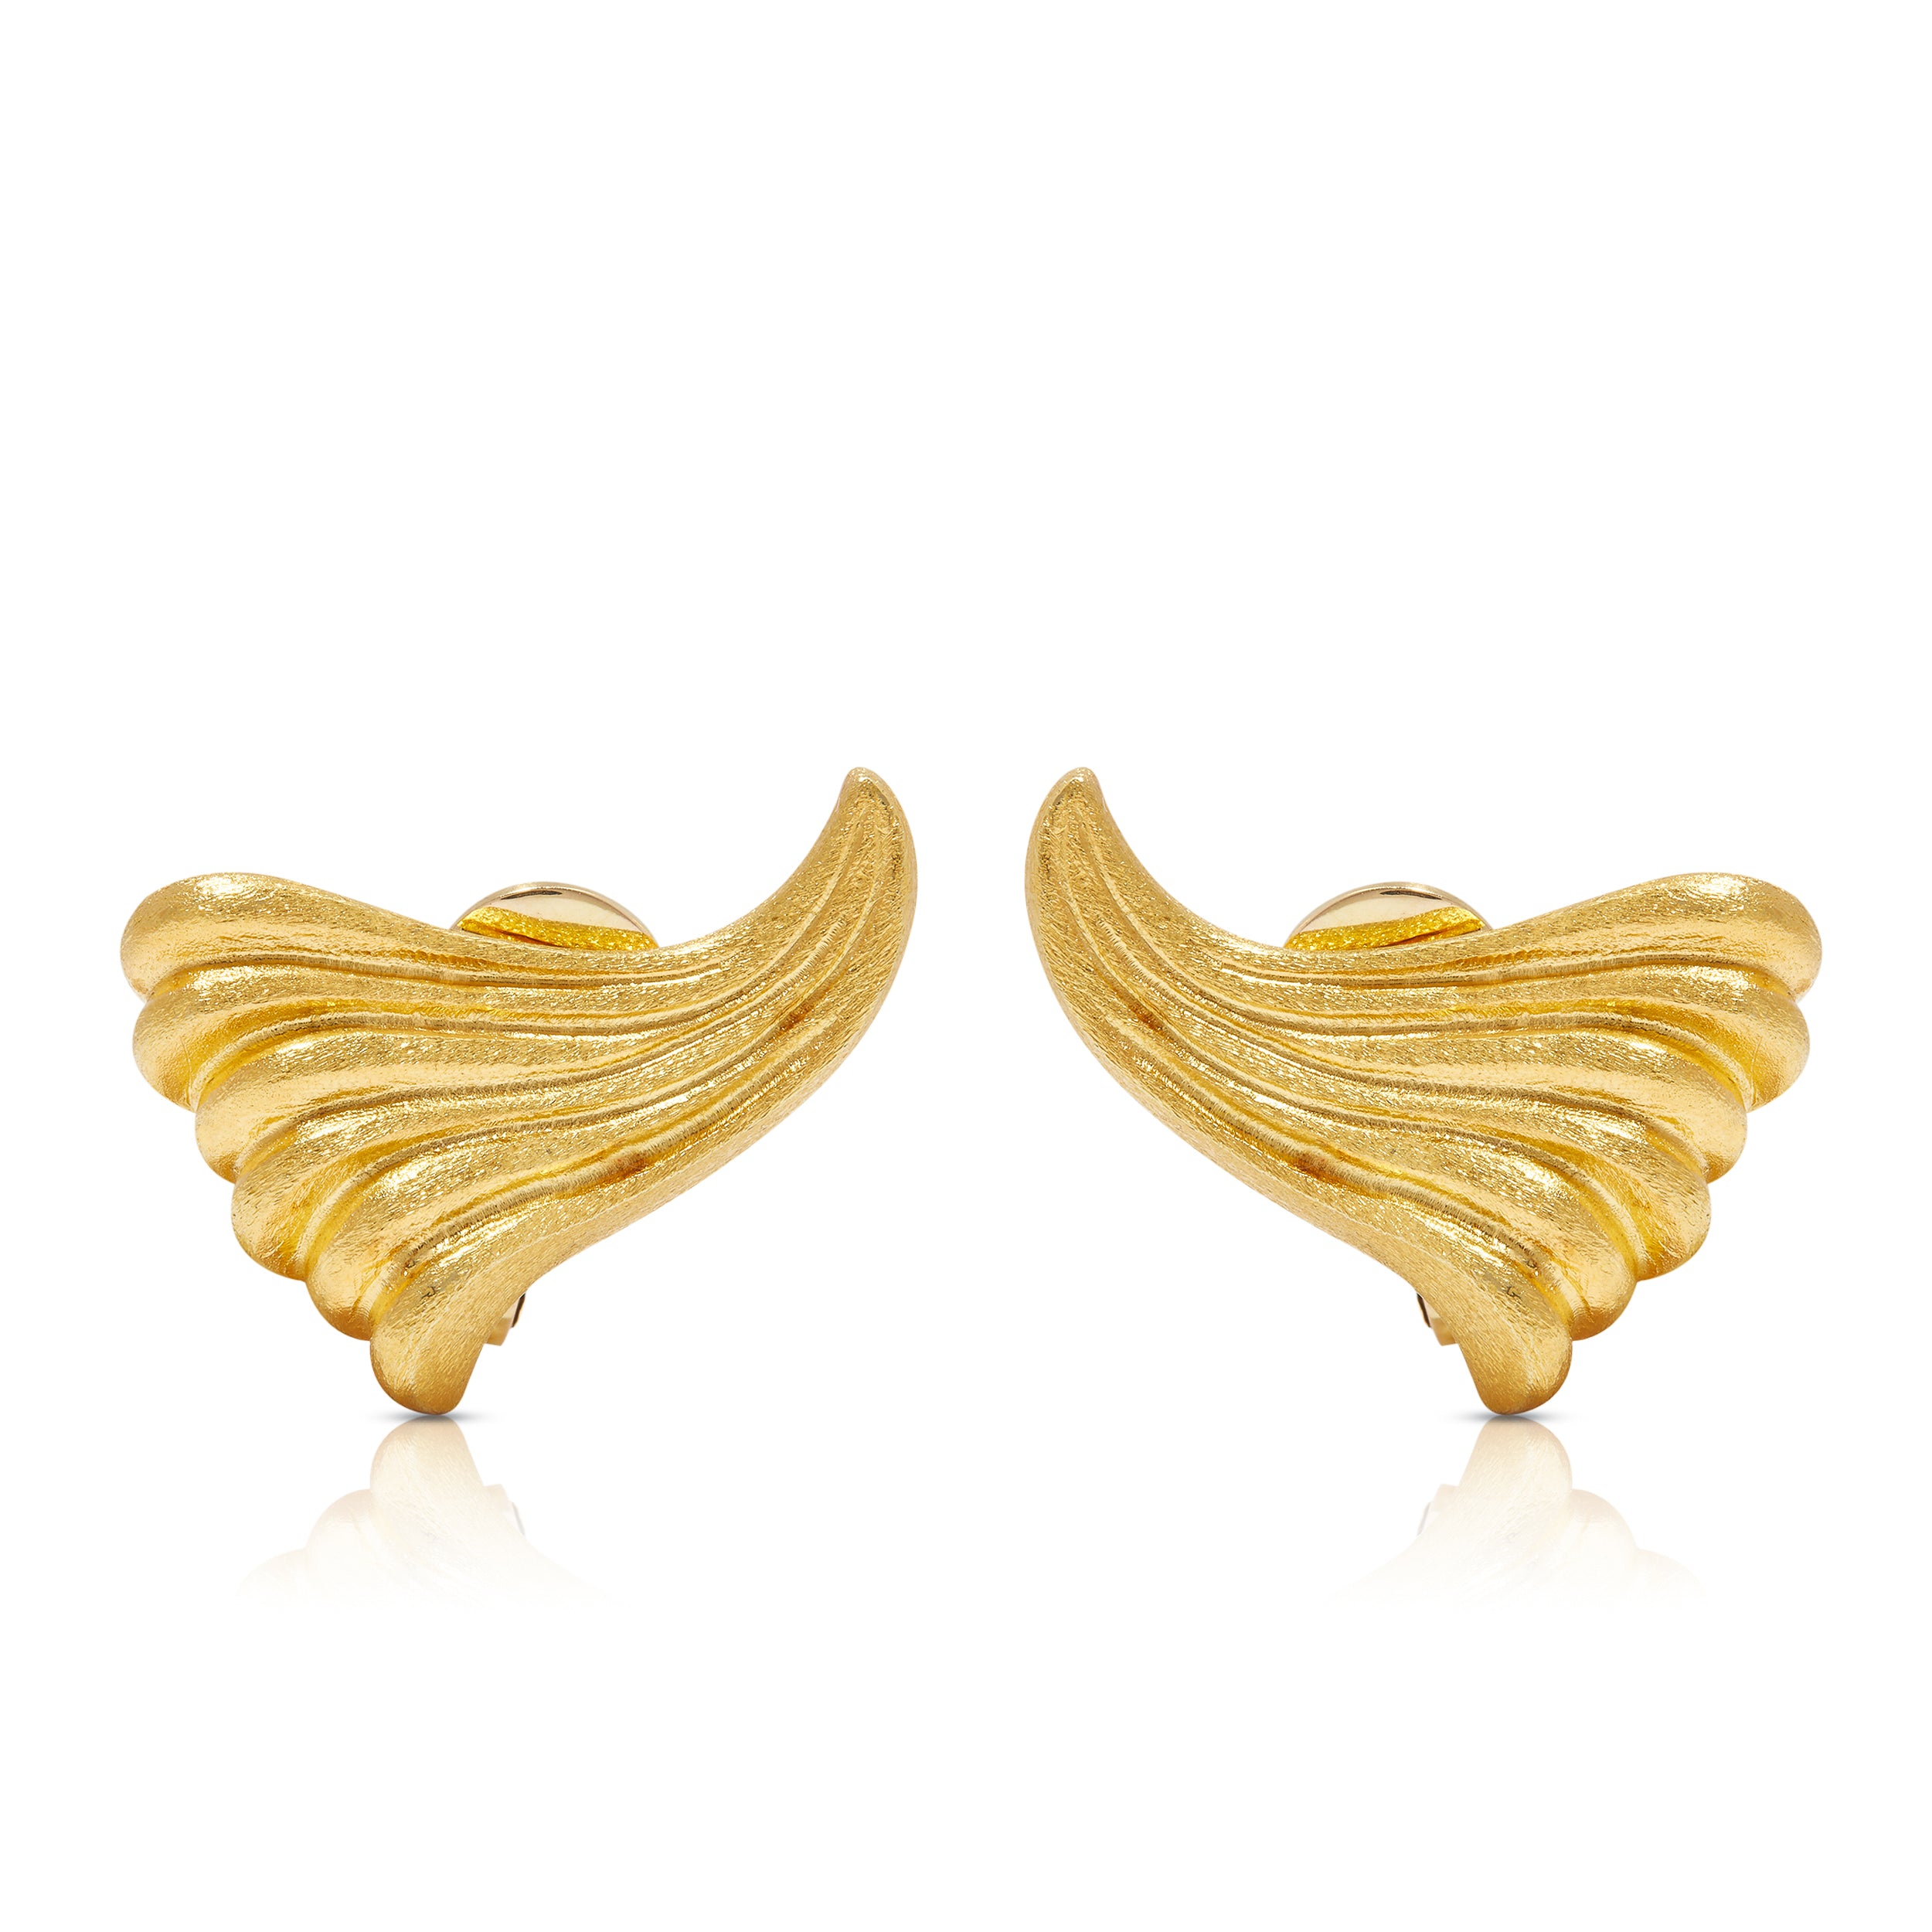 Vintage Maramenos & Pateras brushed 18ct gold earrings in a wave design.